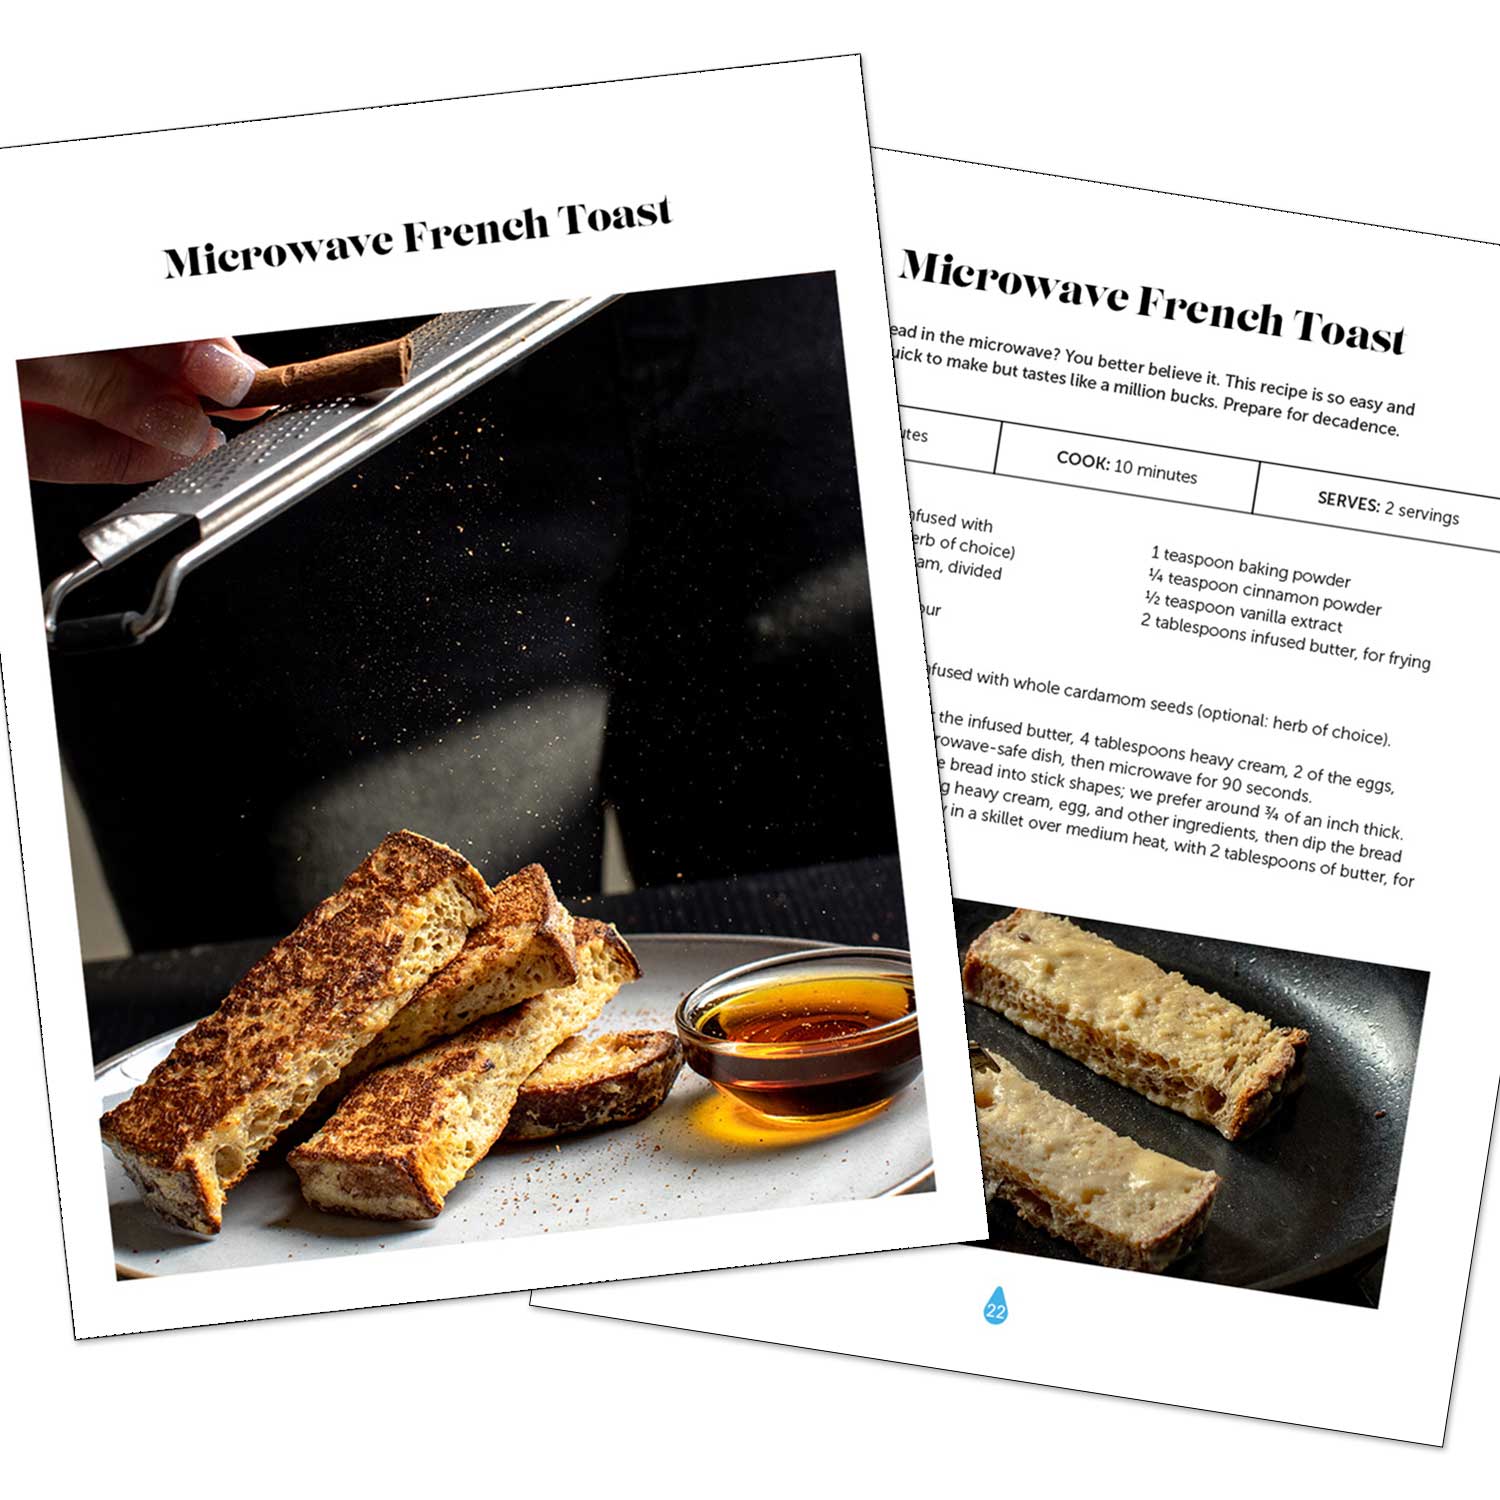 Keto carb-free French Toast?! Yes, it's possible (and delicious). LEVO's Keto cookbook makes ketogenic breakfast, lunch, dinner, and dessert easy. These tasty recipes are perfect for your whole family, or they can be modified for adults-only using flower infused into butter and healthy oils. Gluten-free, carb-free, keto, and even vegan - LEVO's Keto cookbook has it all to make oil infusion easy and mess-free.